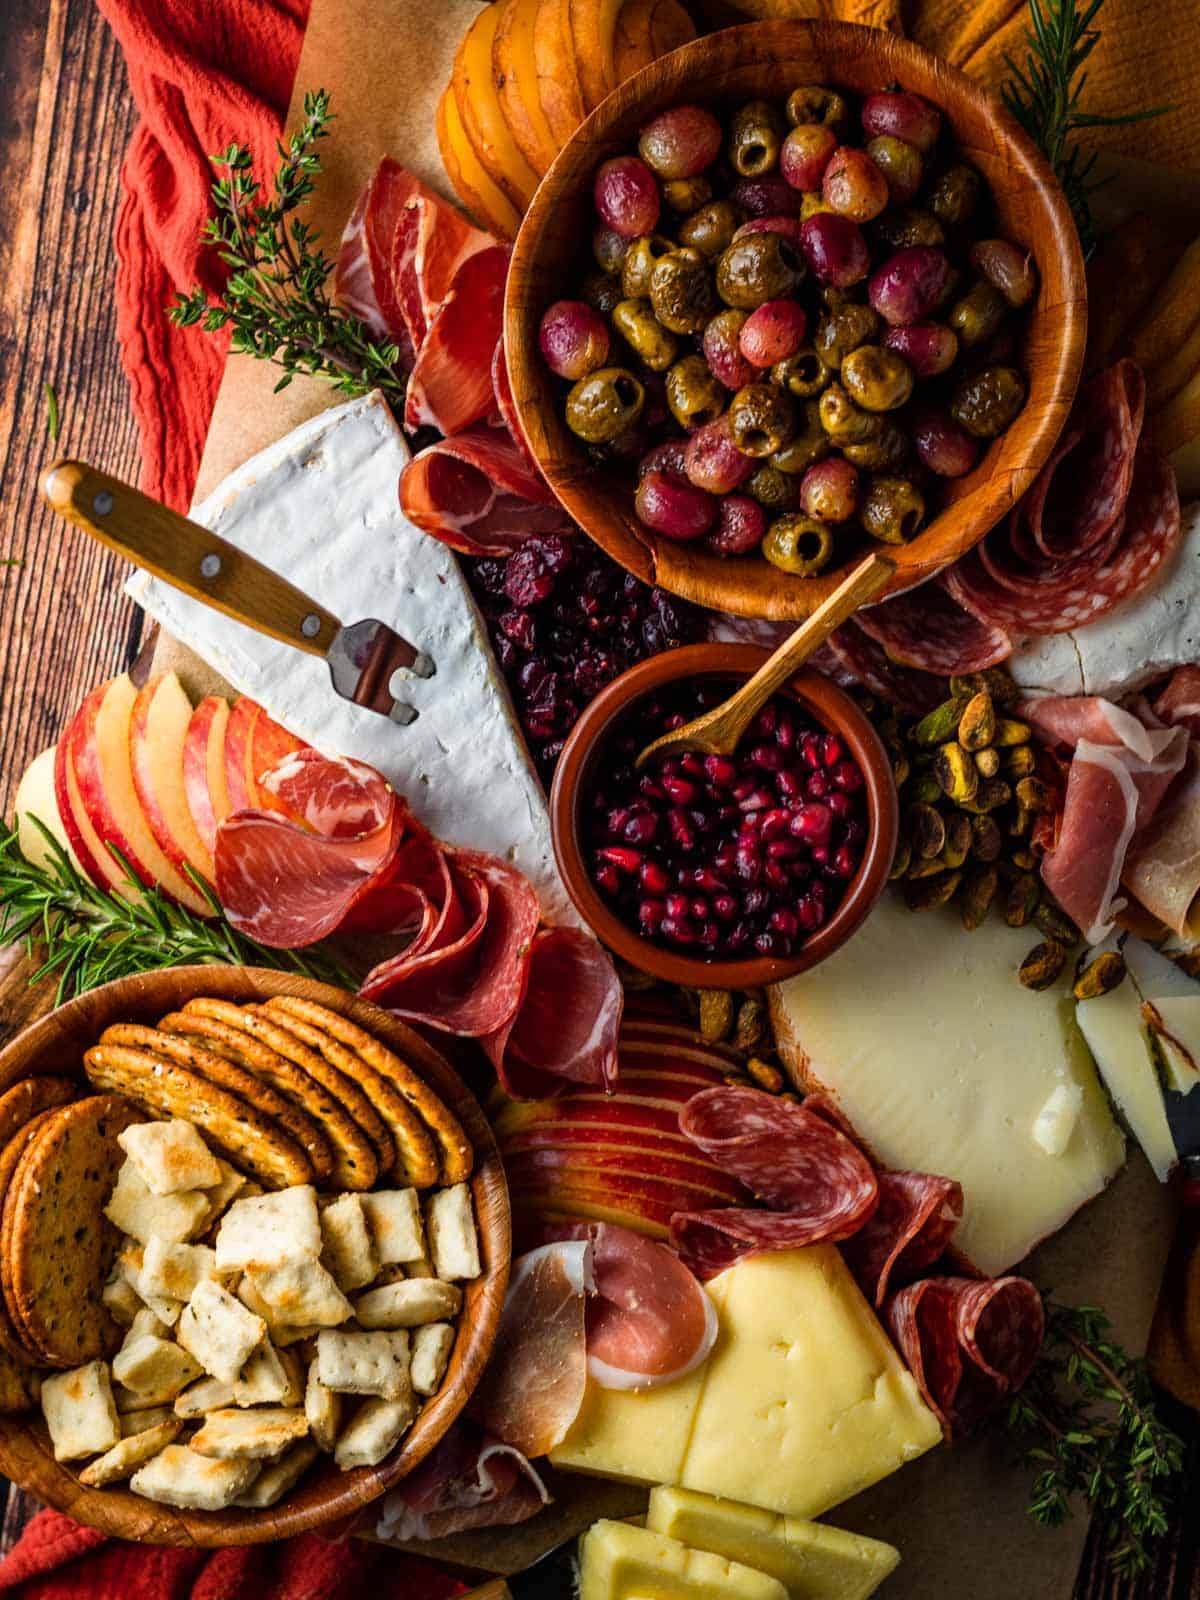 cheeses, grapes and olives, crackers, pomegranate seeds and assorted cured meats, nuts and sliced fresh apple